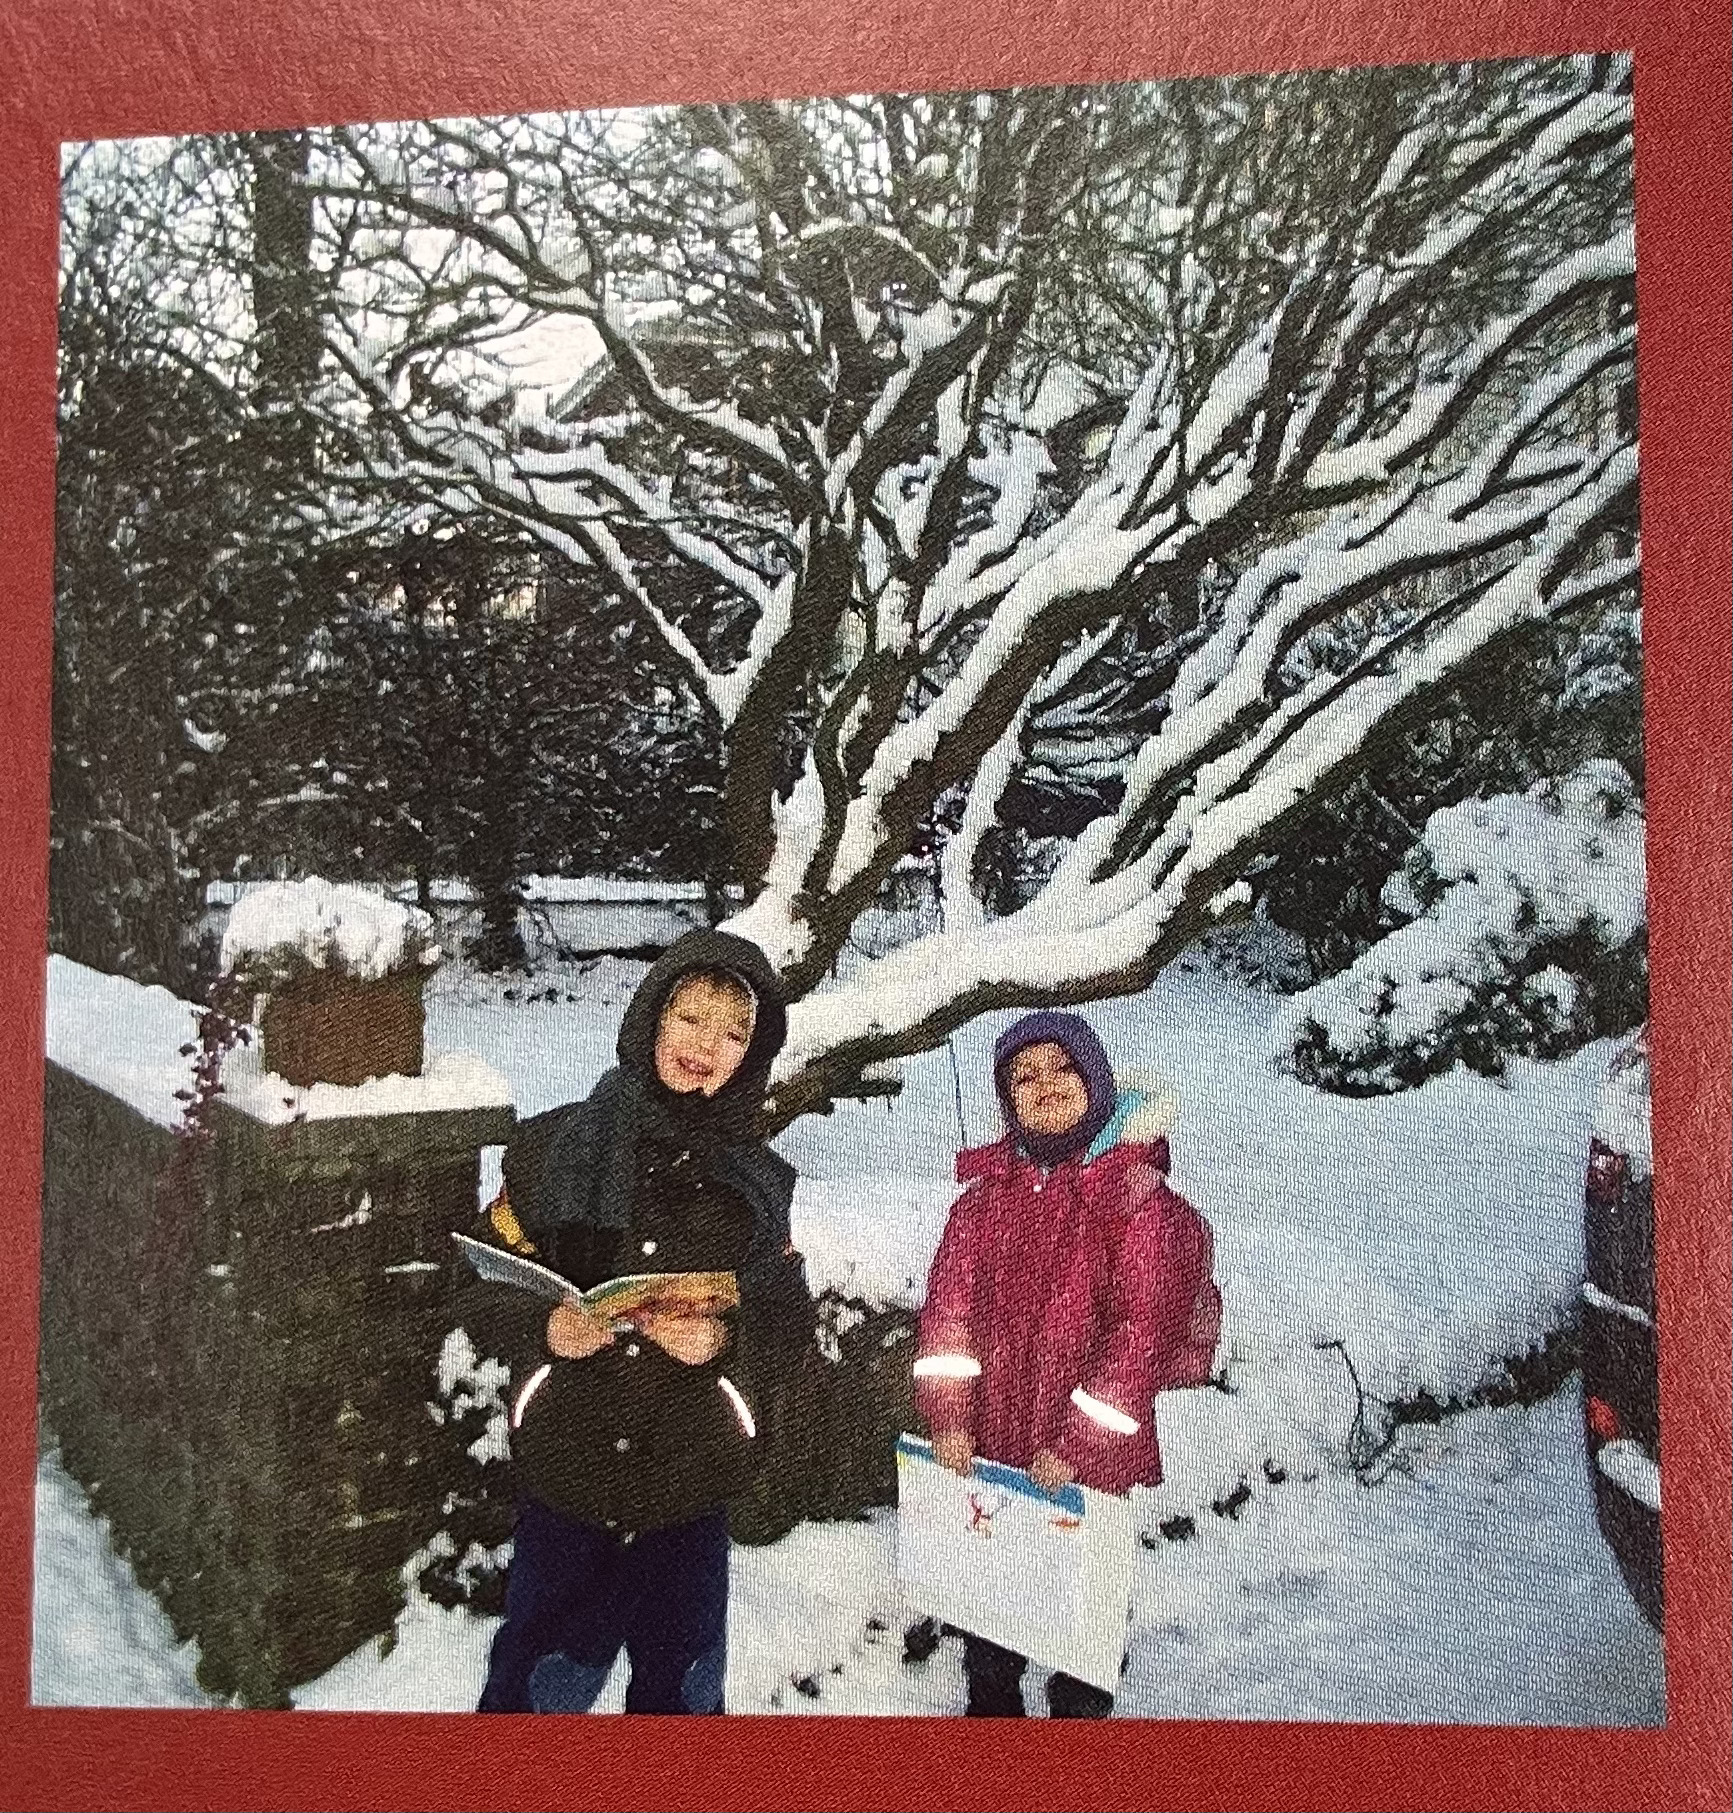 Straight from the pages of his mother’s scrapbook, this picture shows Arvid and his brother Eren on a snowy day in Belgium. This memory is one of many from Arvid’s childhood - adventures throughout Europe and beyond. From Belgium and Estonia, to Turkey, Greece and France, Arvid and his family have traveled far and experienced many cultures.